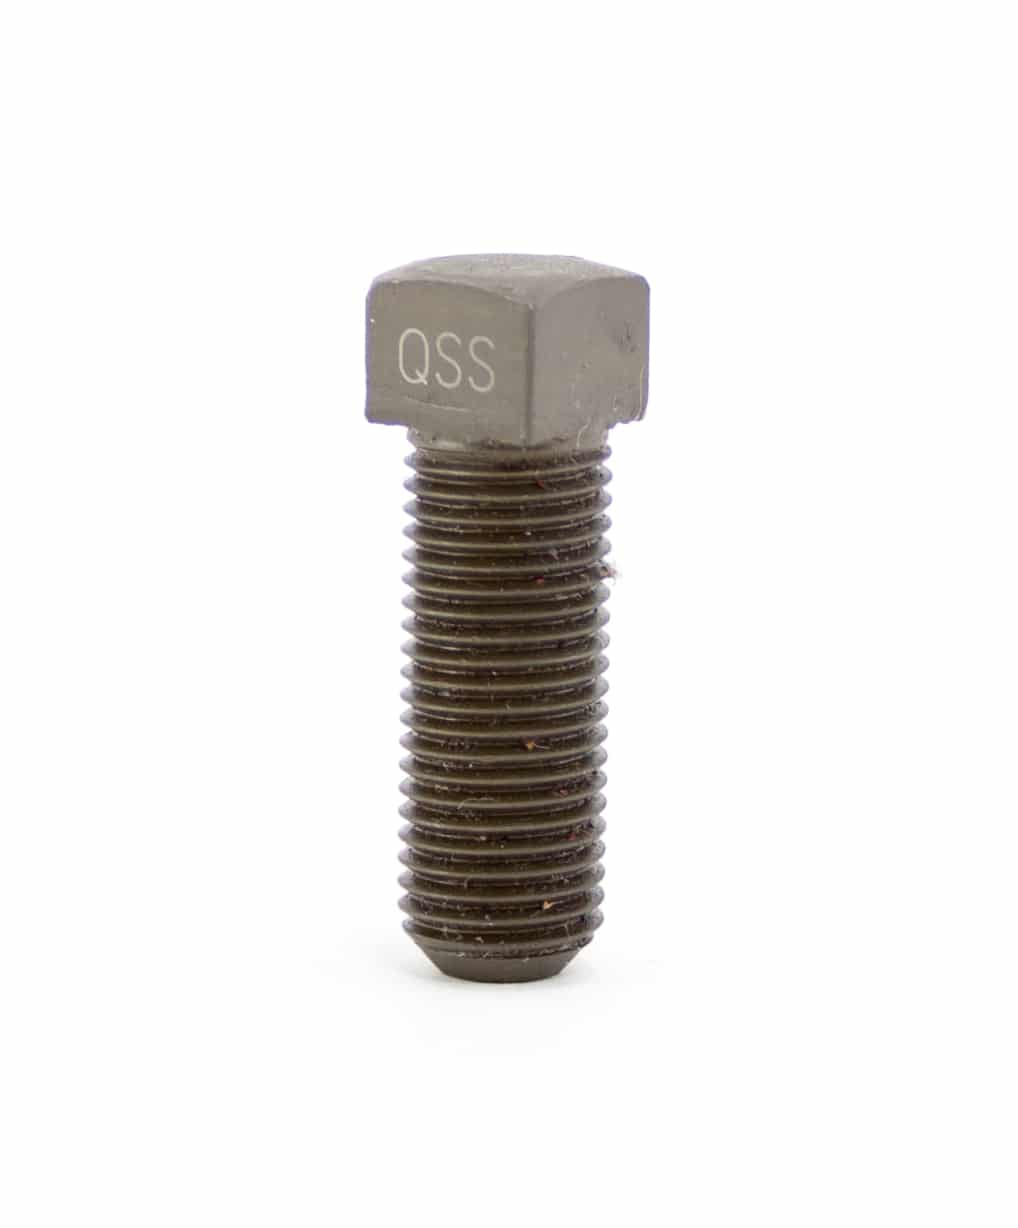 Laser Engraving on Small Screw